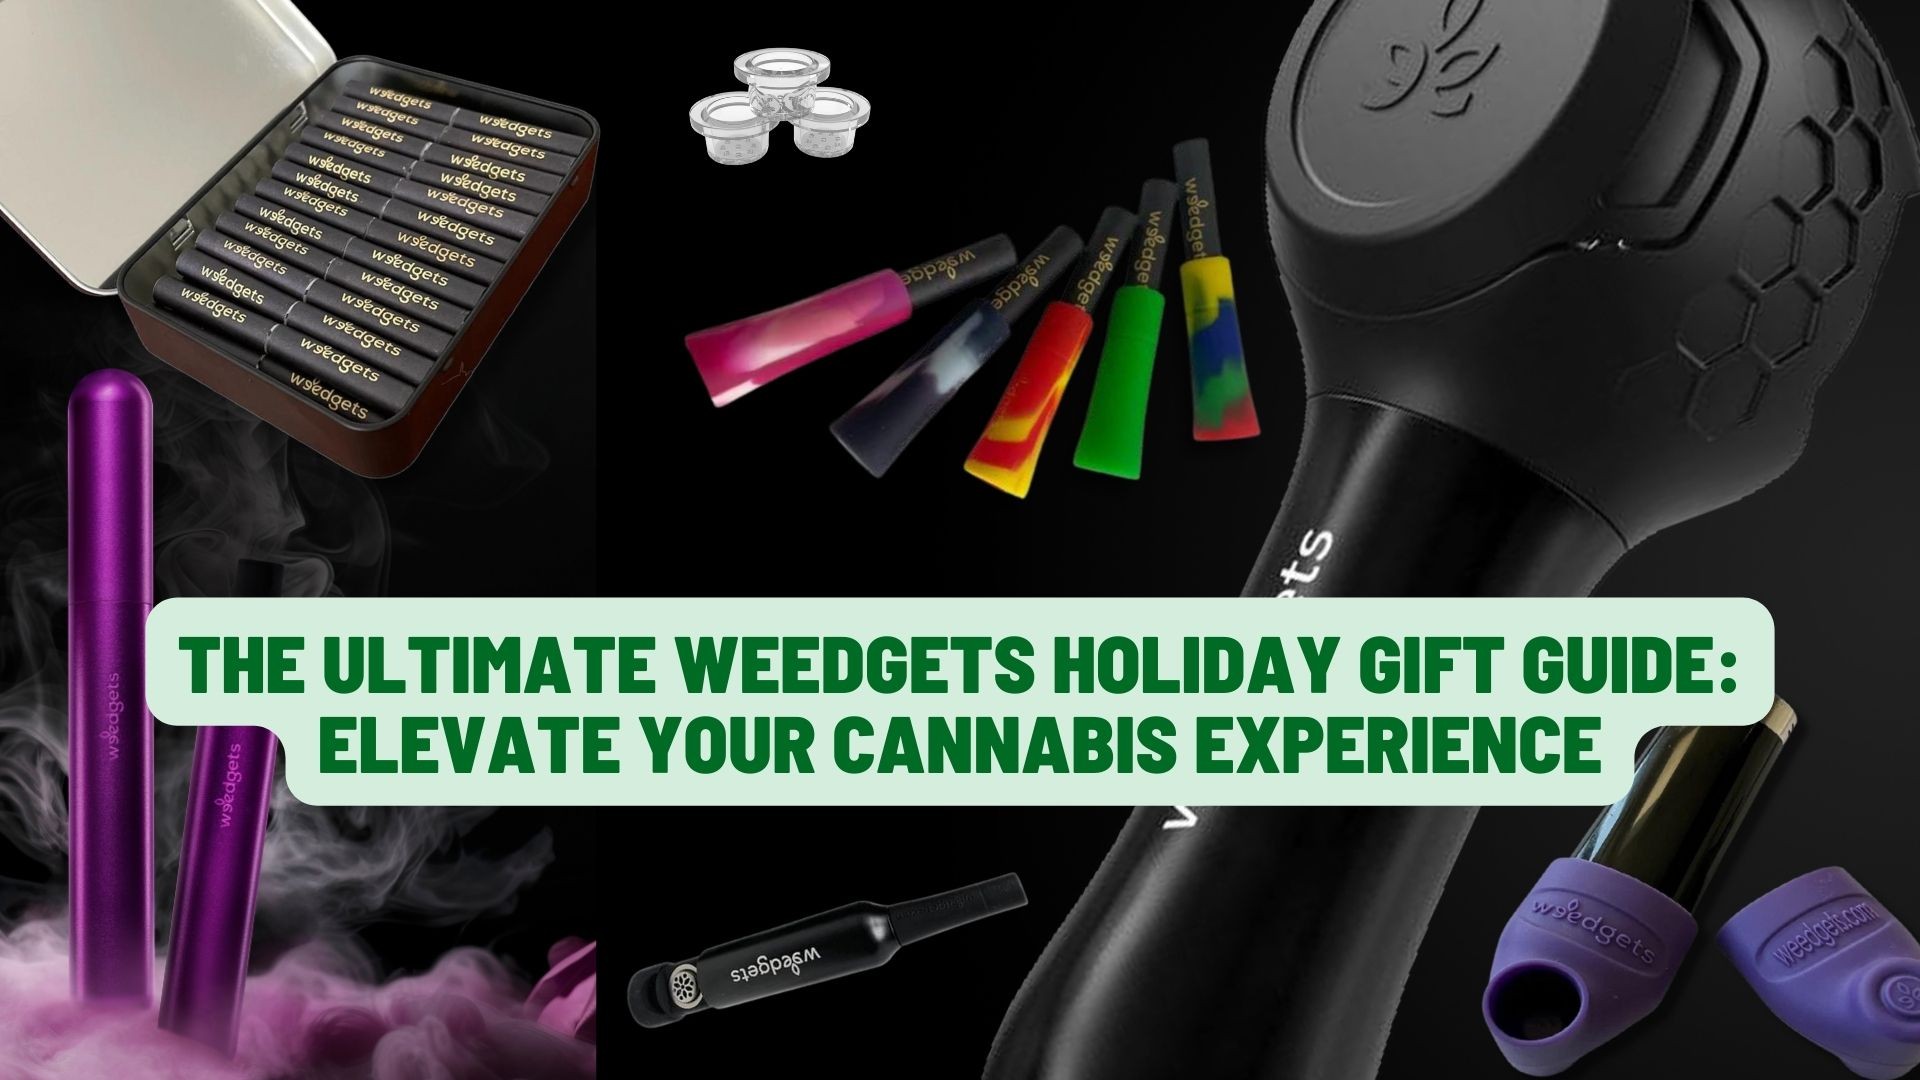 The Ultimate Weedgets Holiday Gift Guide: Elevate Your Cannabis Experience